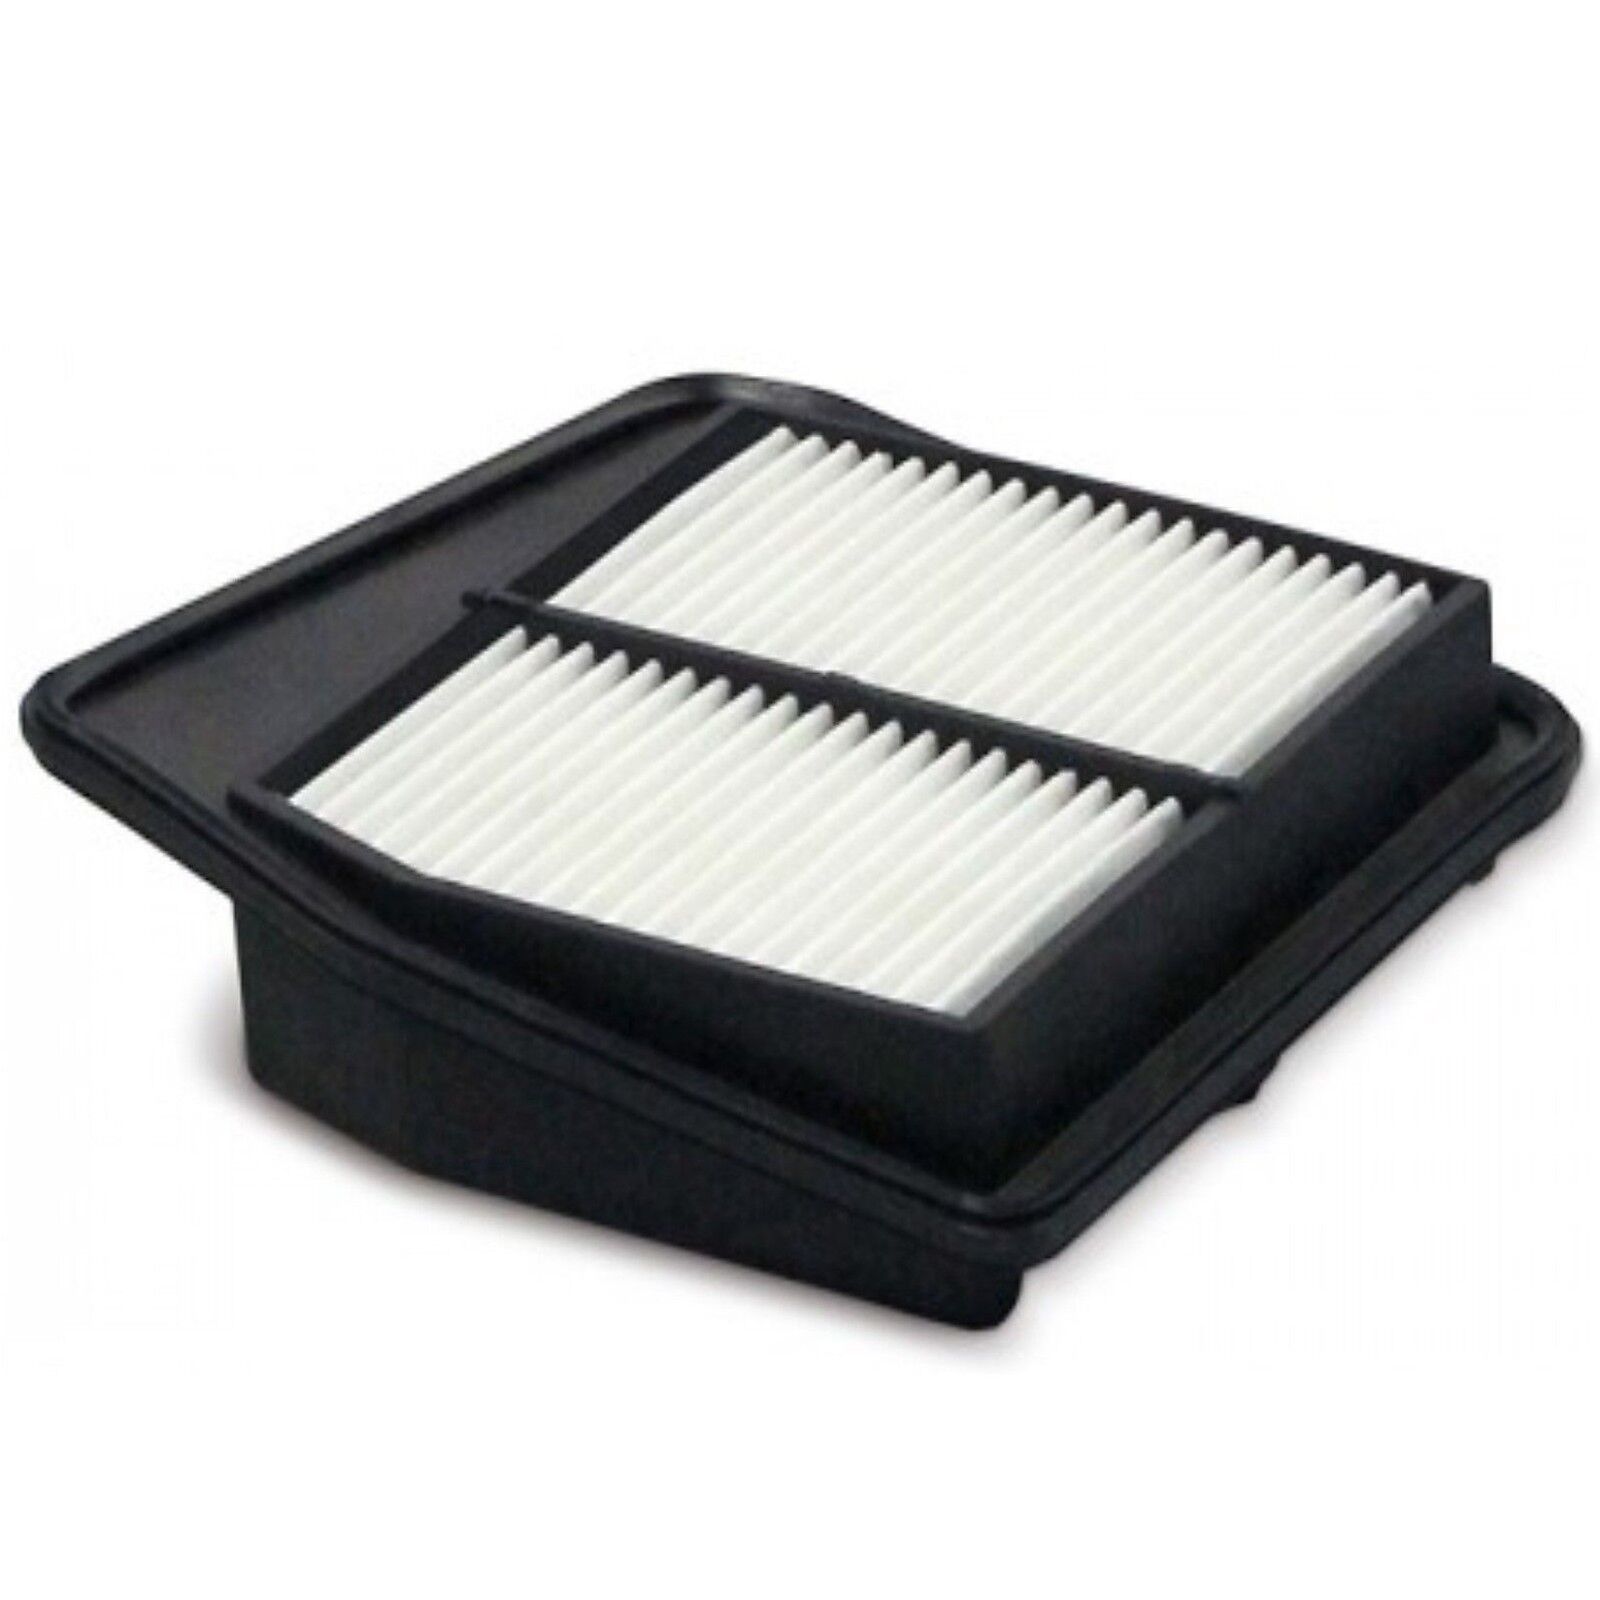 AIR FILTER For ACURA TSX 2.4L OEM 17220-RL5-A00 2014-2009